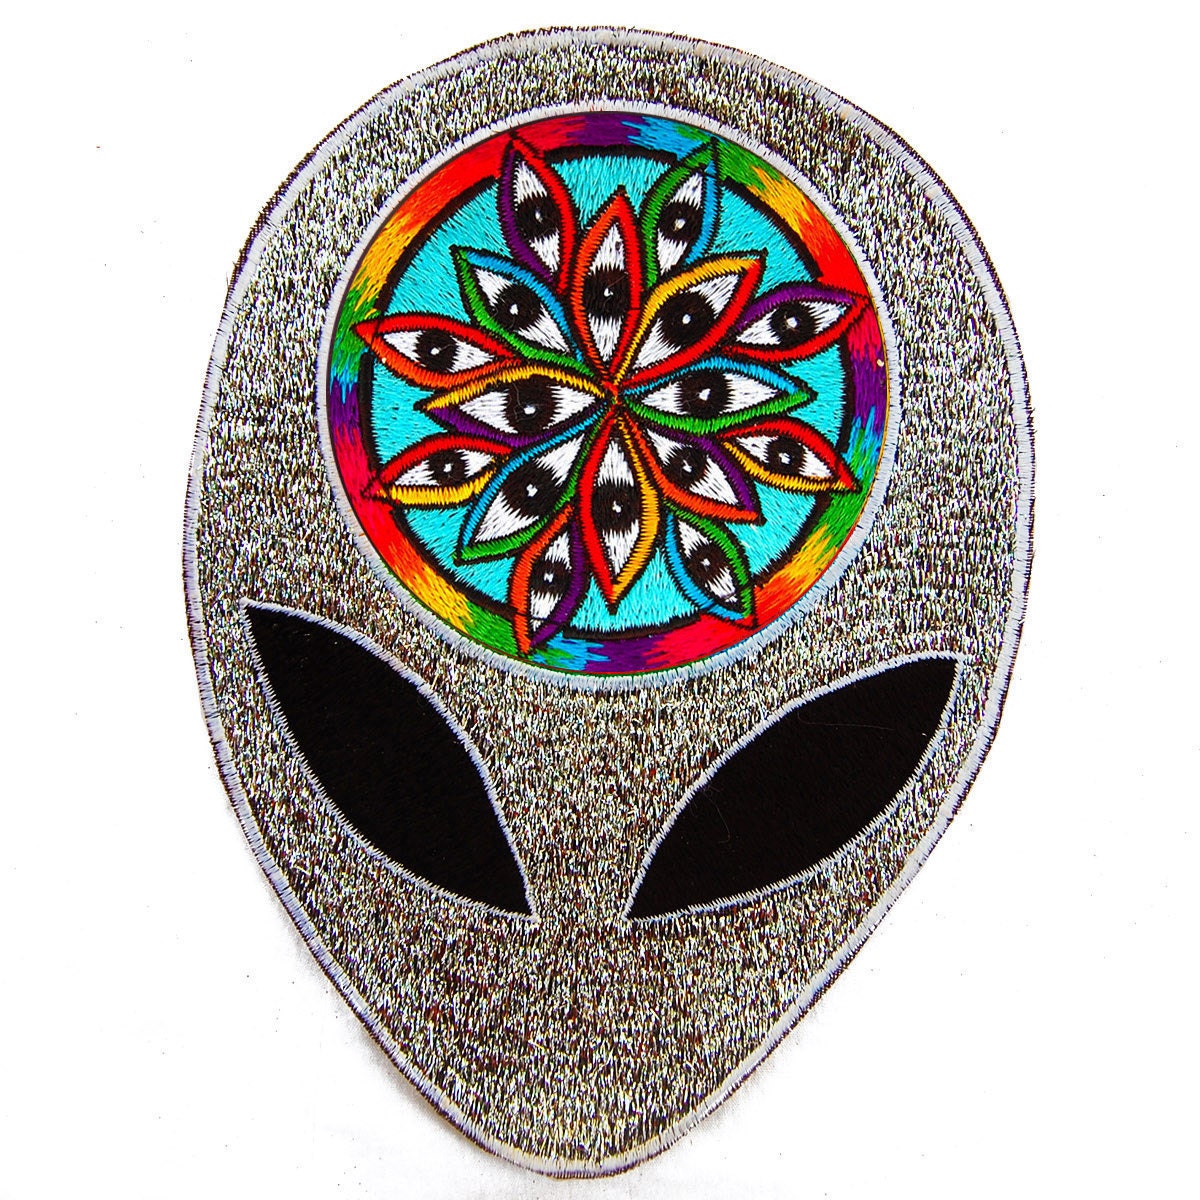 1000 alien eyes patch Patch LSD consciousness acid head extraterrestrial awareness